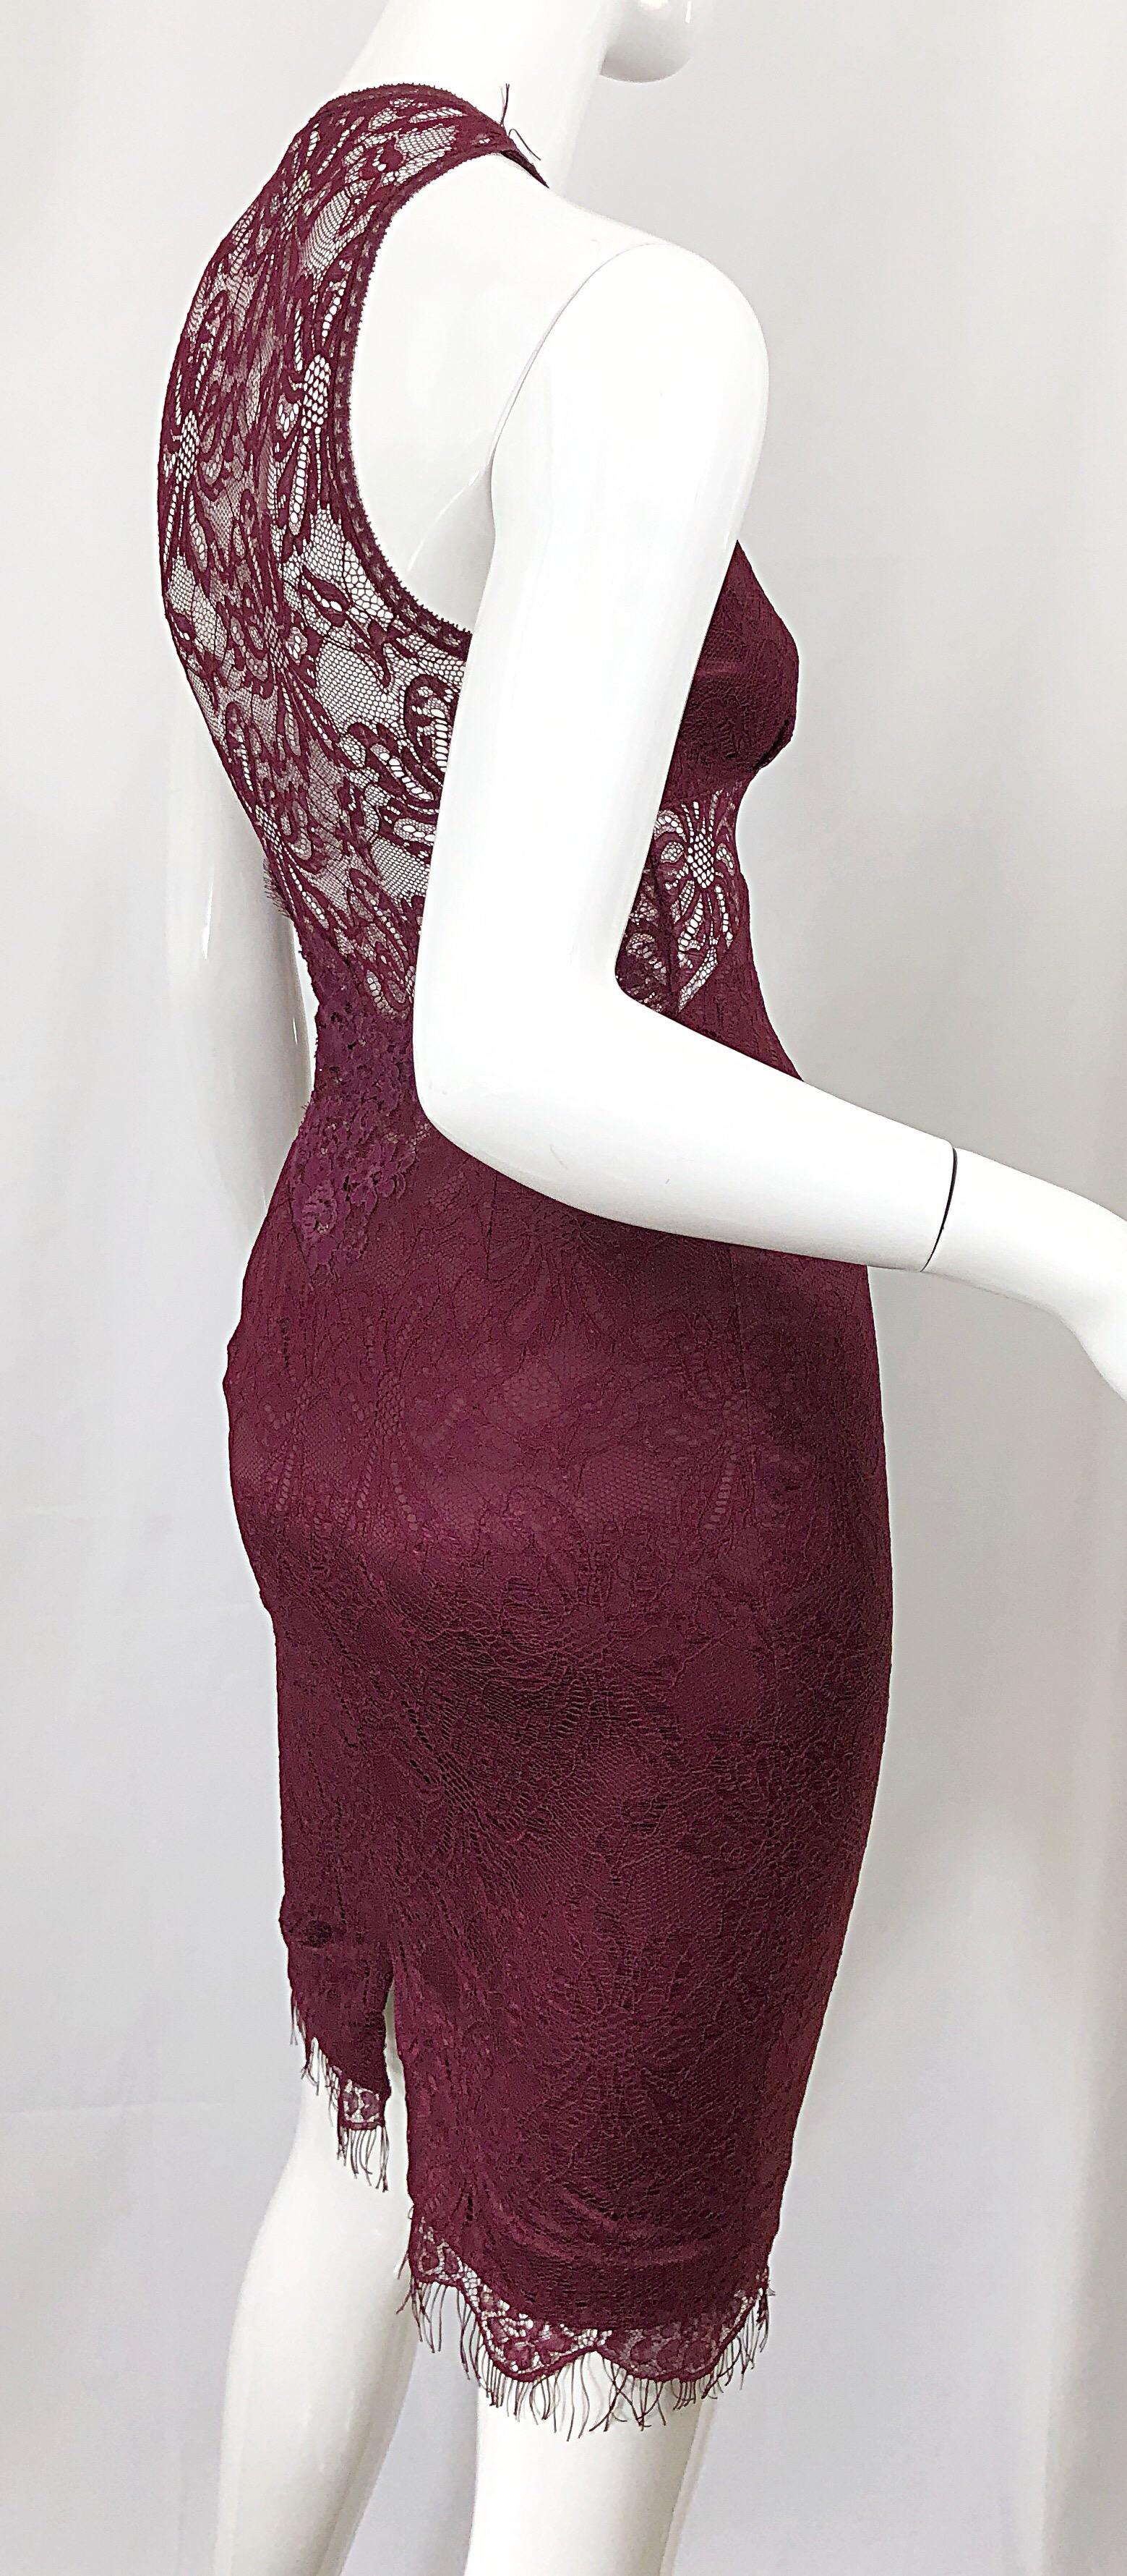 Dolce & Gabbana 1990s Burgundy Merlot Sexy Lace Bodycon Cut Out Vintage Dress 38 In Excellent Condition For Sale In San Diego, CA